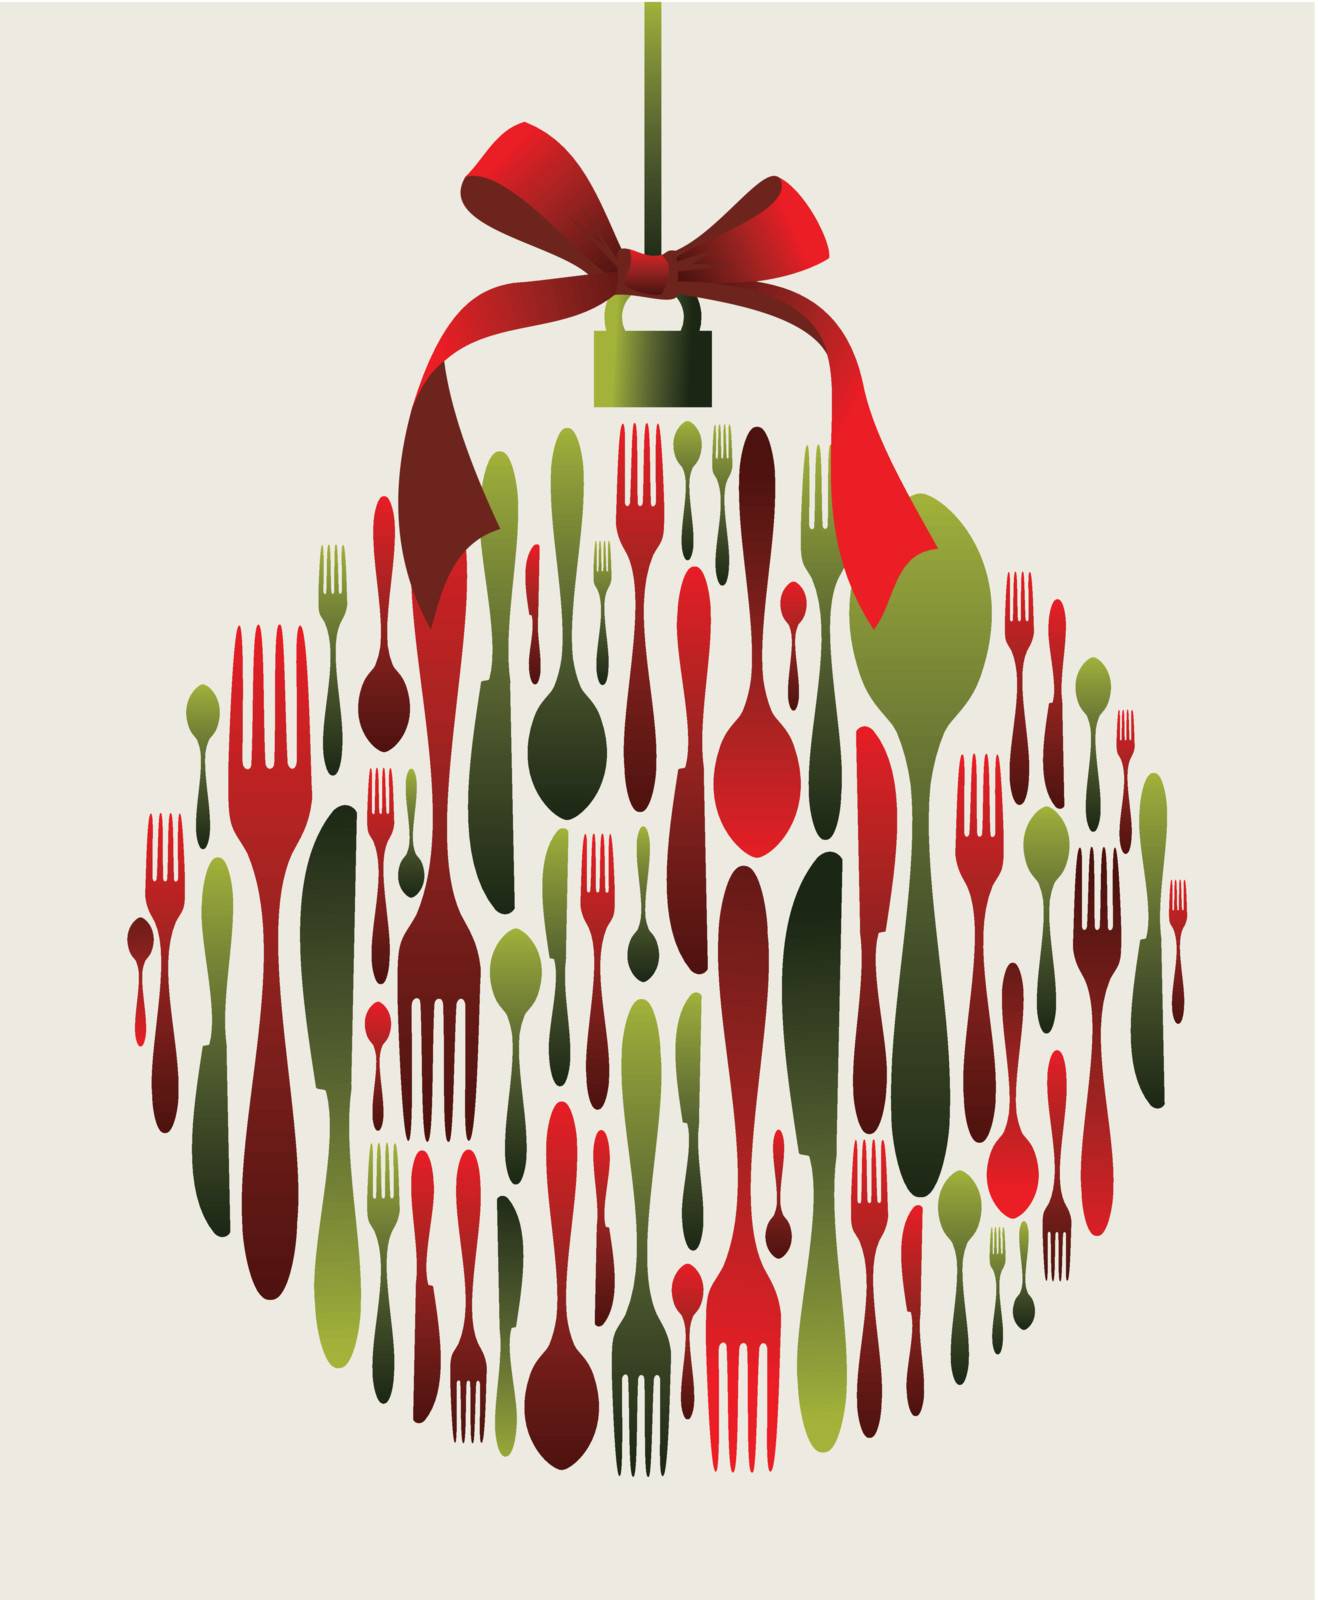 Christmas bauble Cutlery. Fork, spoon and knife pattern in bauble shape with a ribbon on top. Usable as invitation card. Vector file available.